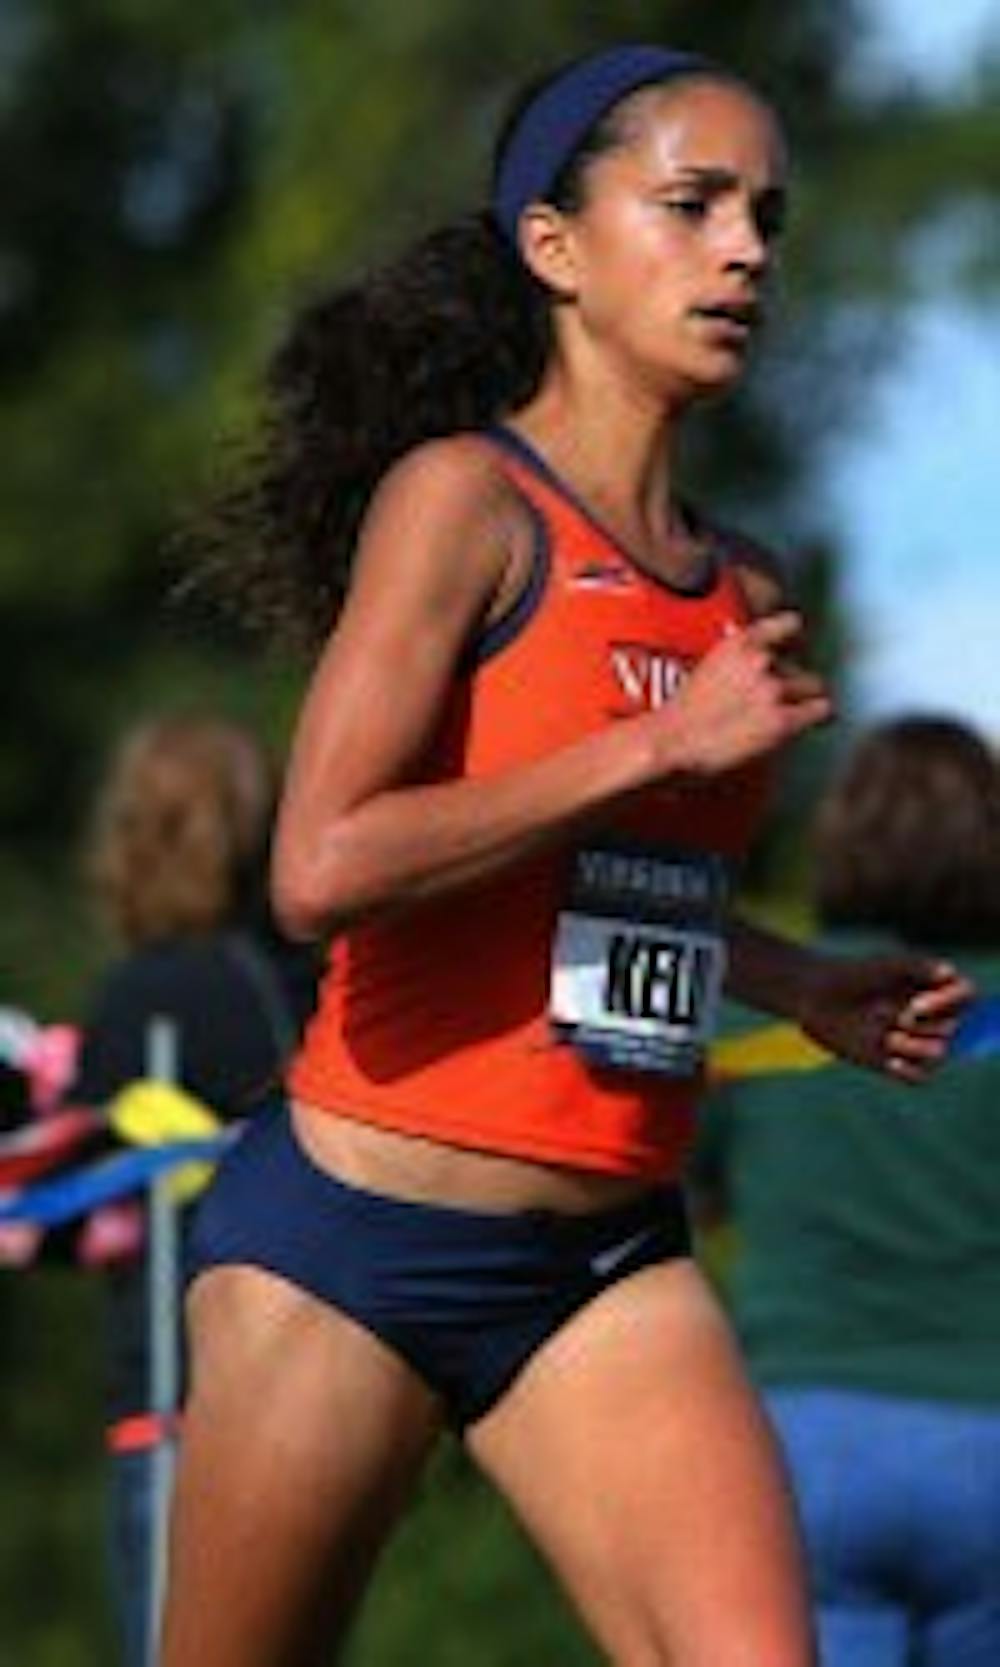 <p>Graduate student Morgan Kelly placed 41st at the NCAA Cross Country Championships this past Saturday, the highest individual finish at the race among Cavalier runners. </p>